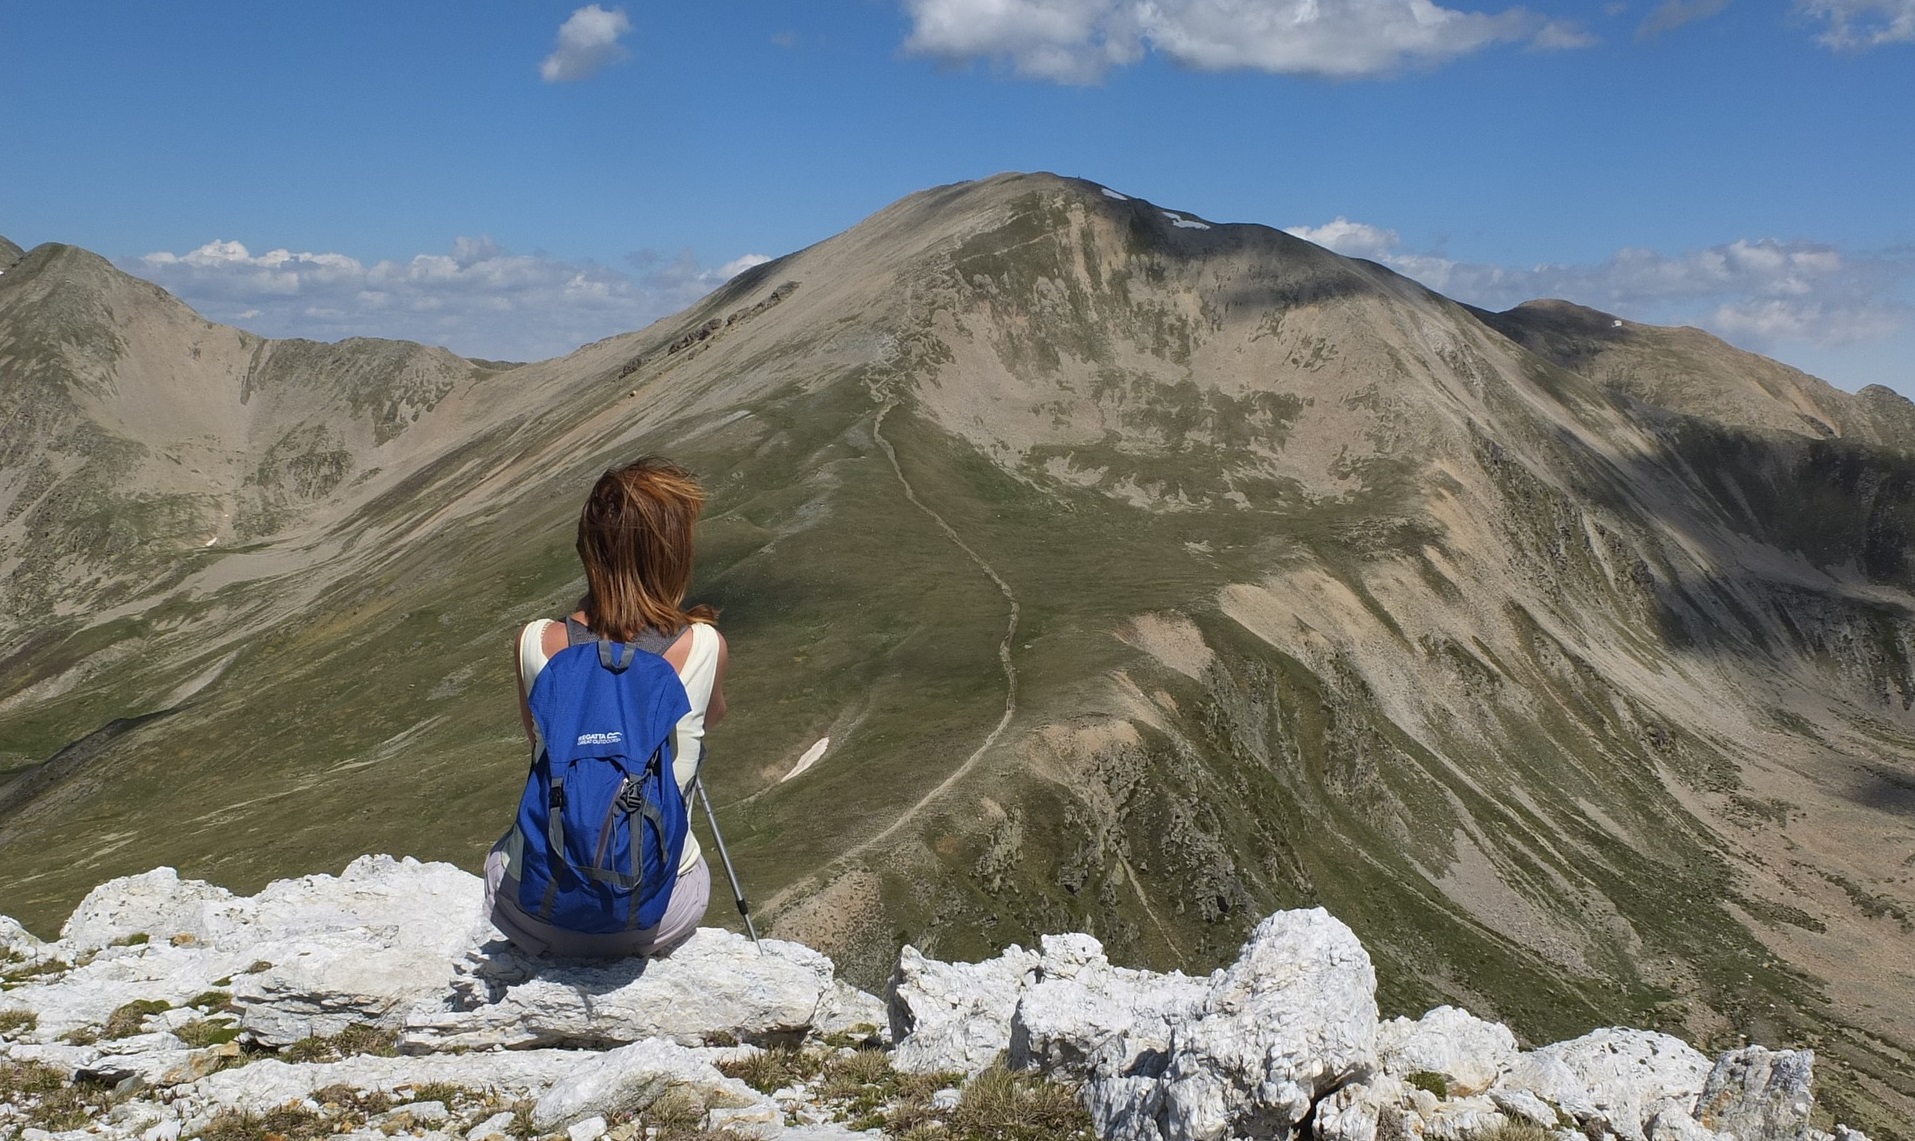 A young woman sits with her back to the camera facing a mountain. A path winds up the mountain.